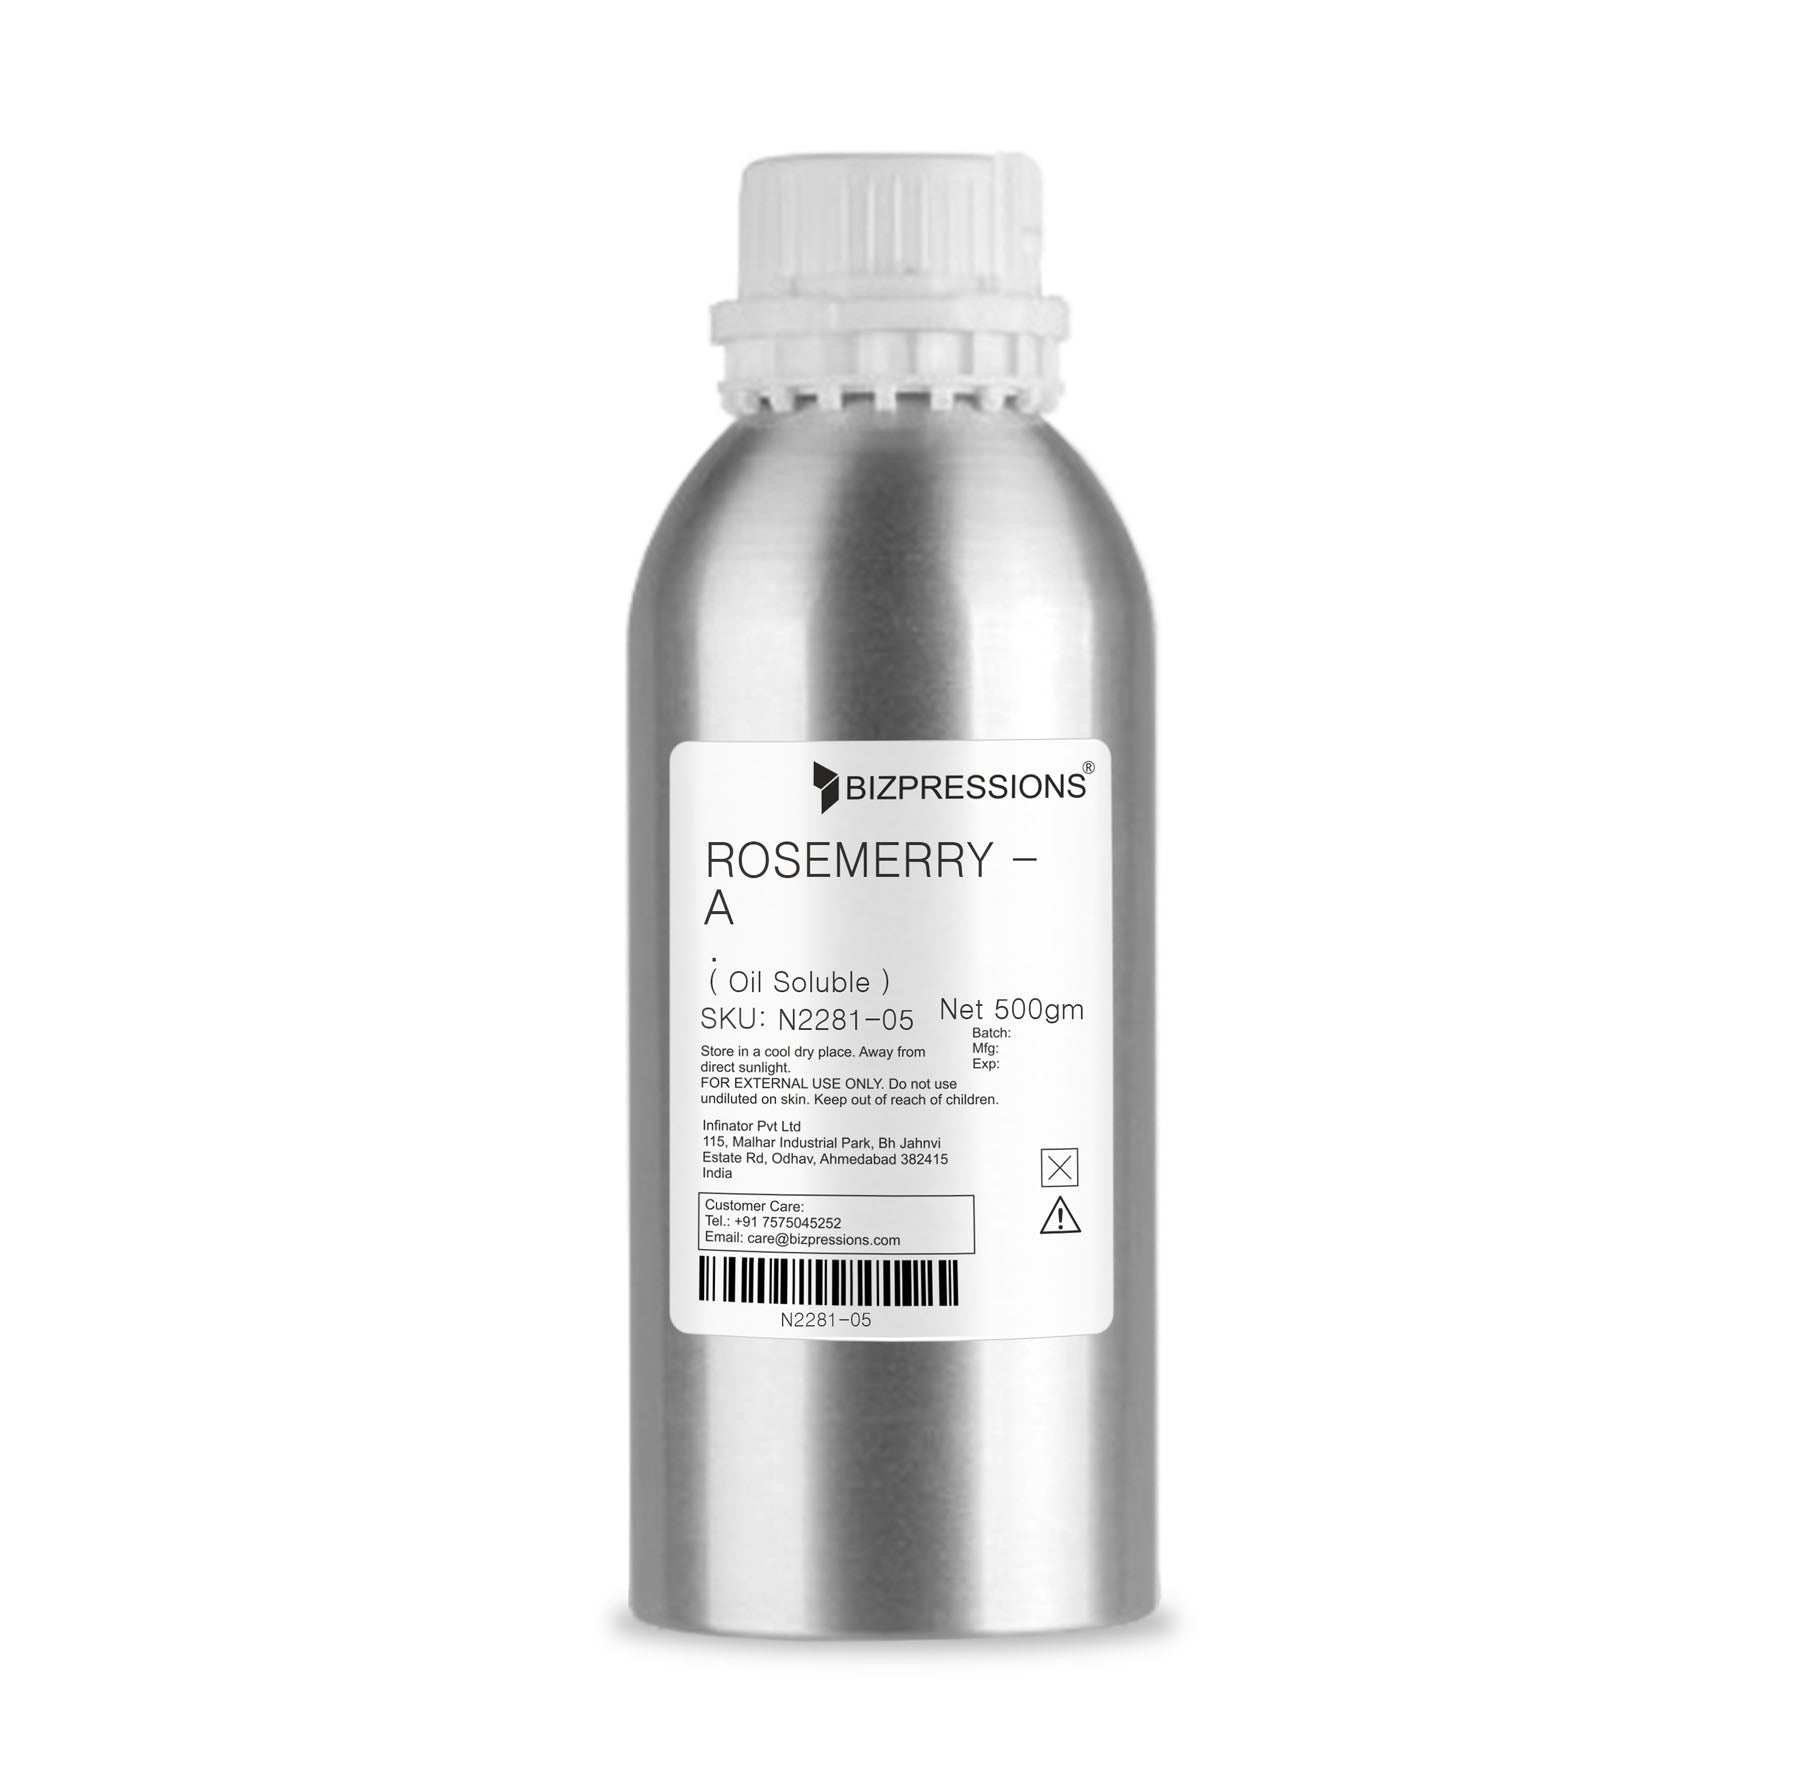 ROSEMERRY - A - Fragrance ( Oil Soluble ) - 500 gm